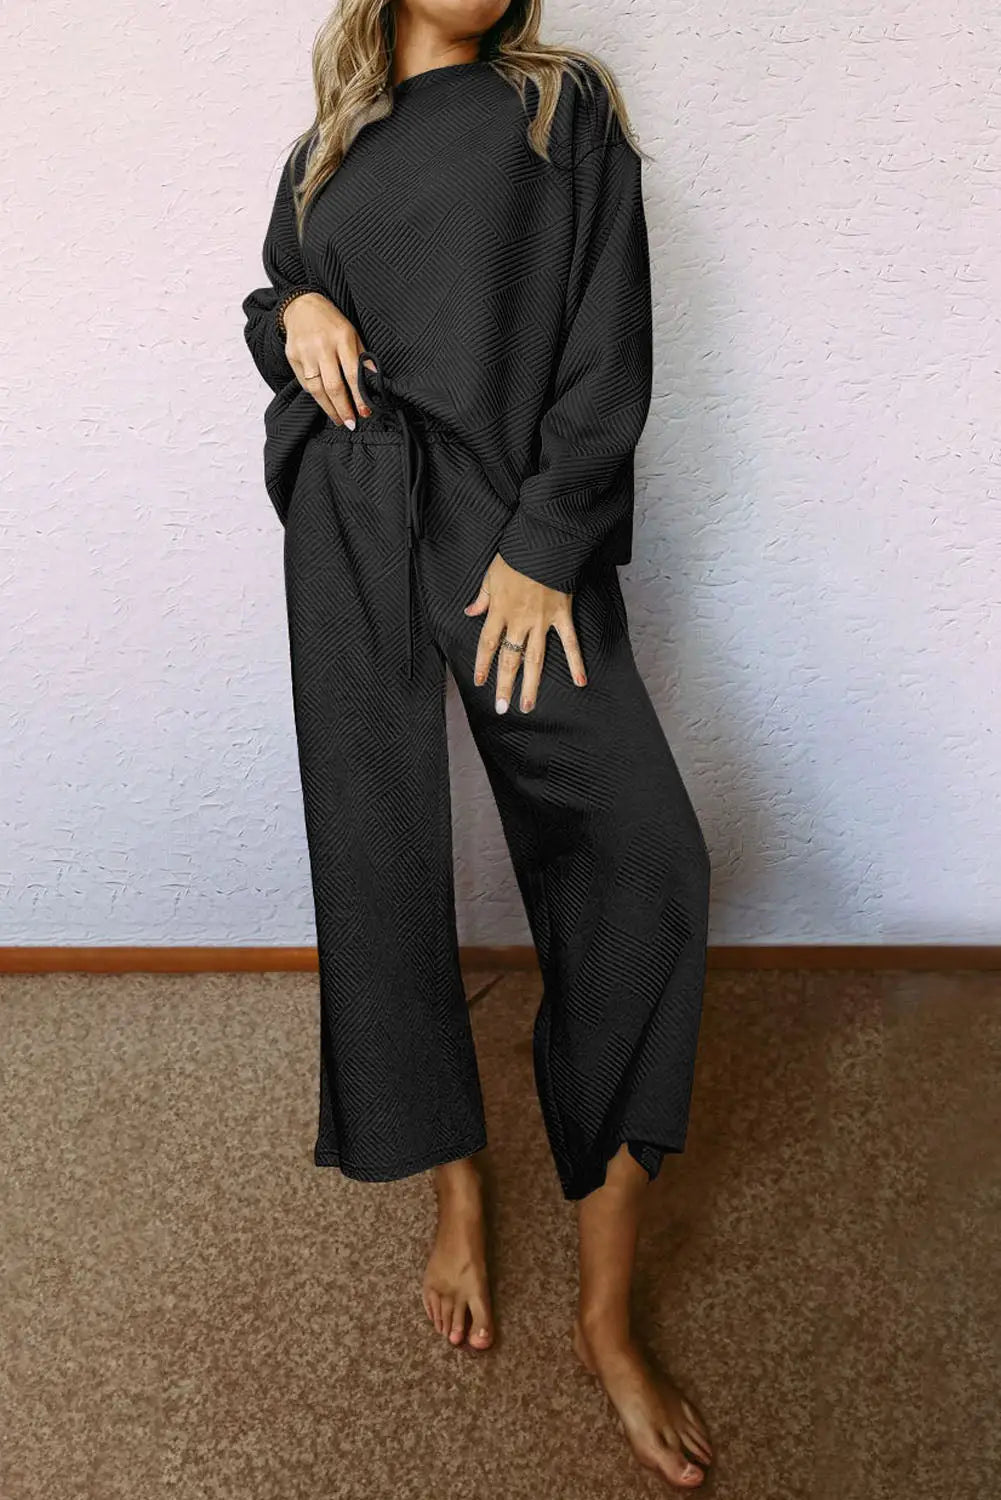 Black ultra loose textured 2pcs slouchy outfit - 2xl 95% polyester + 5% elastane pants sets